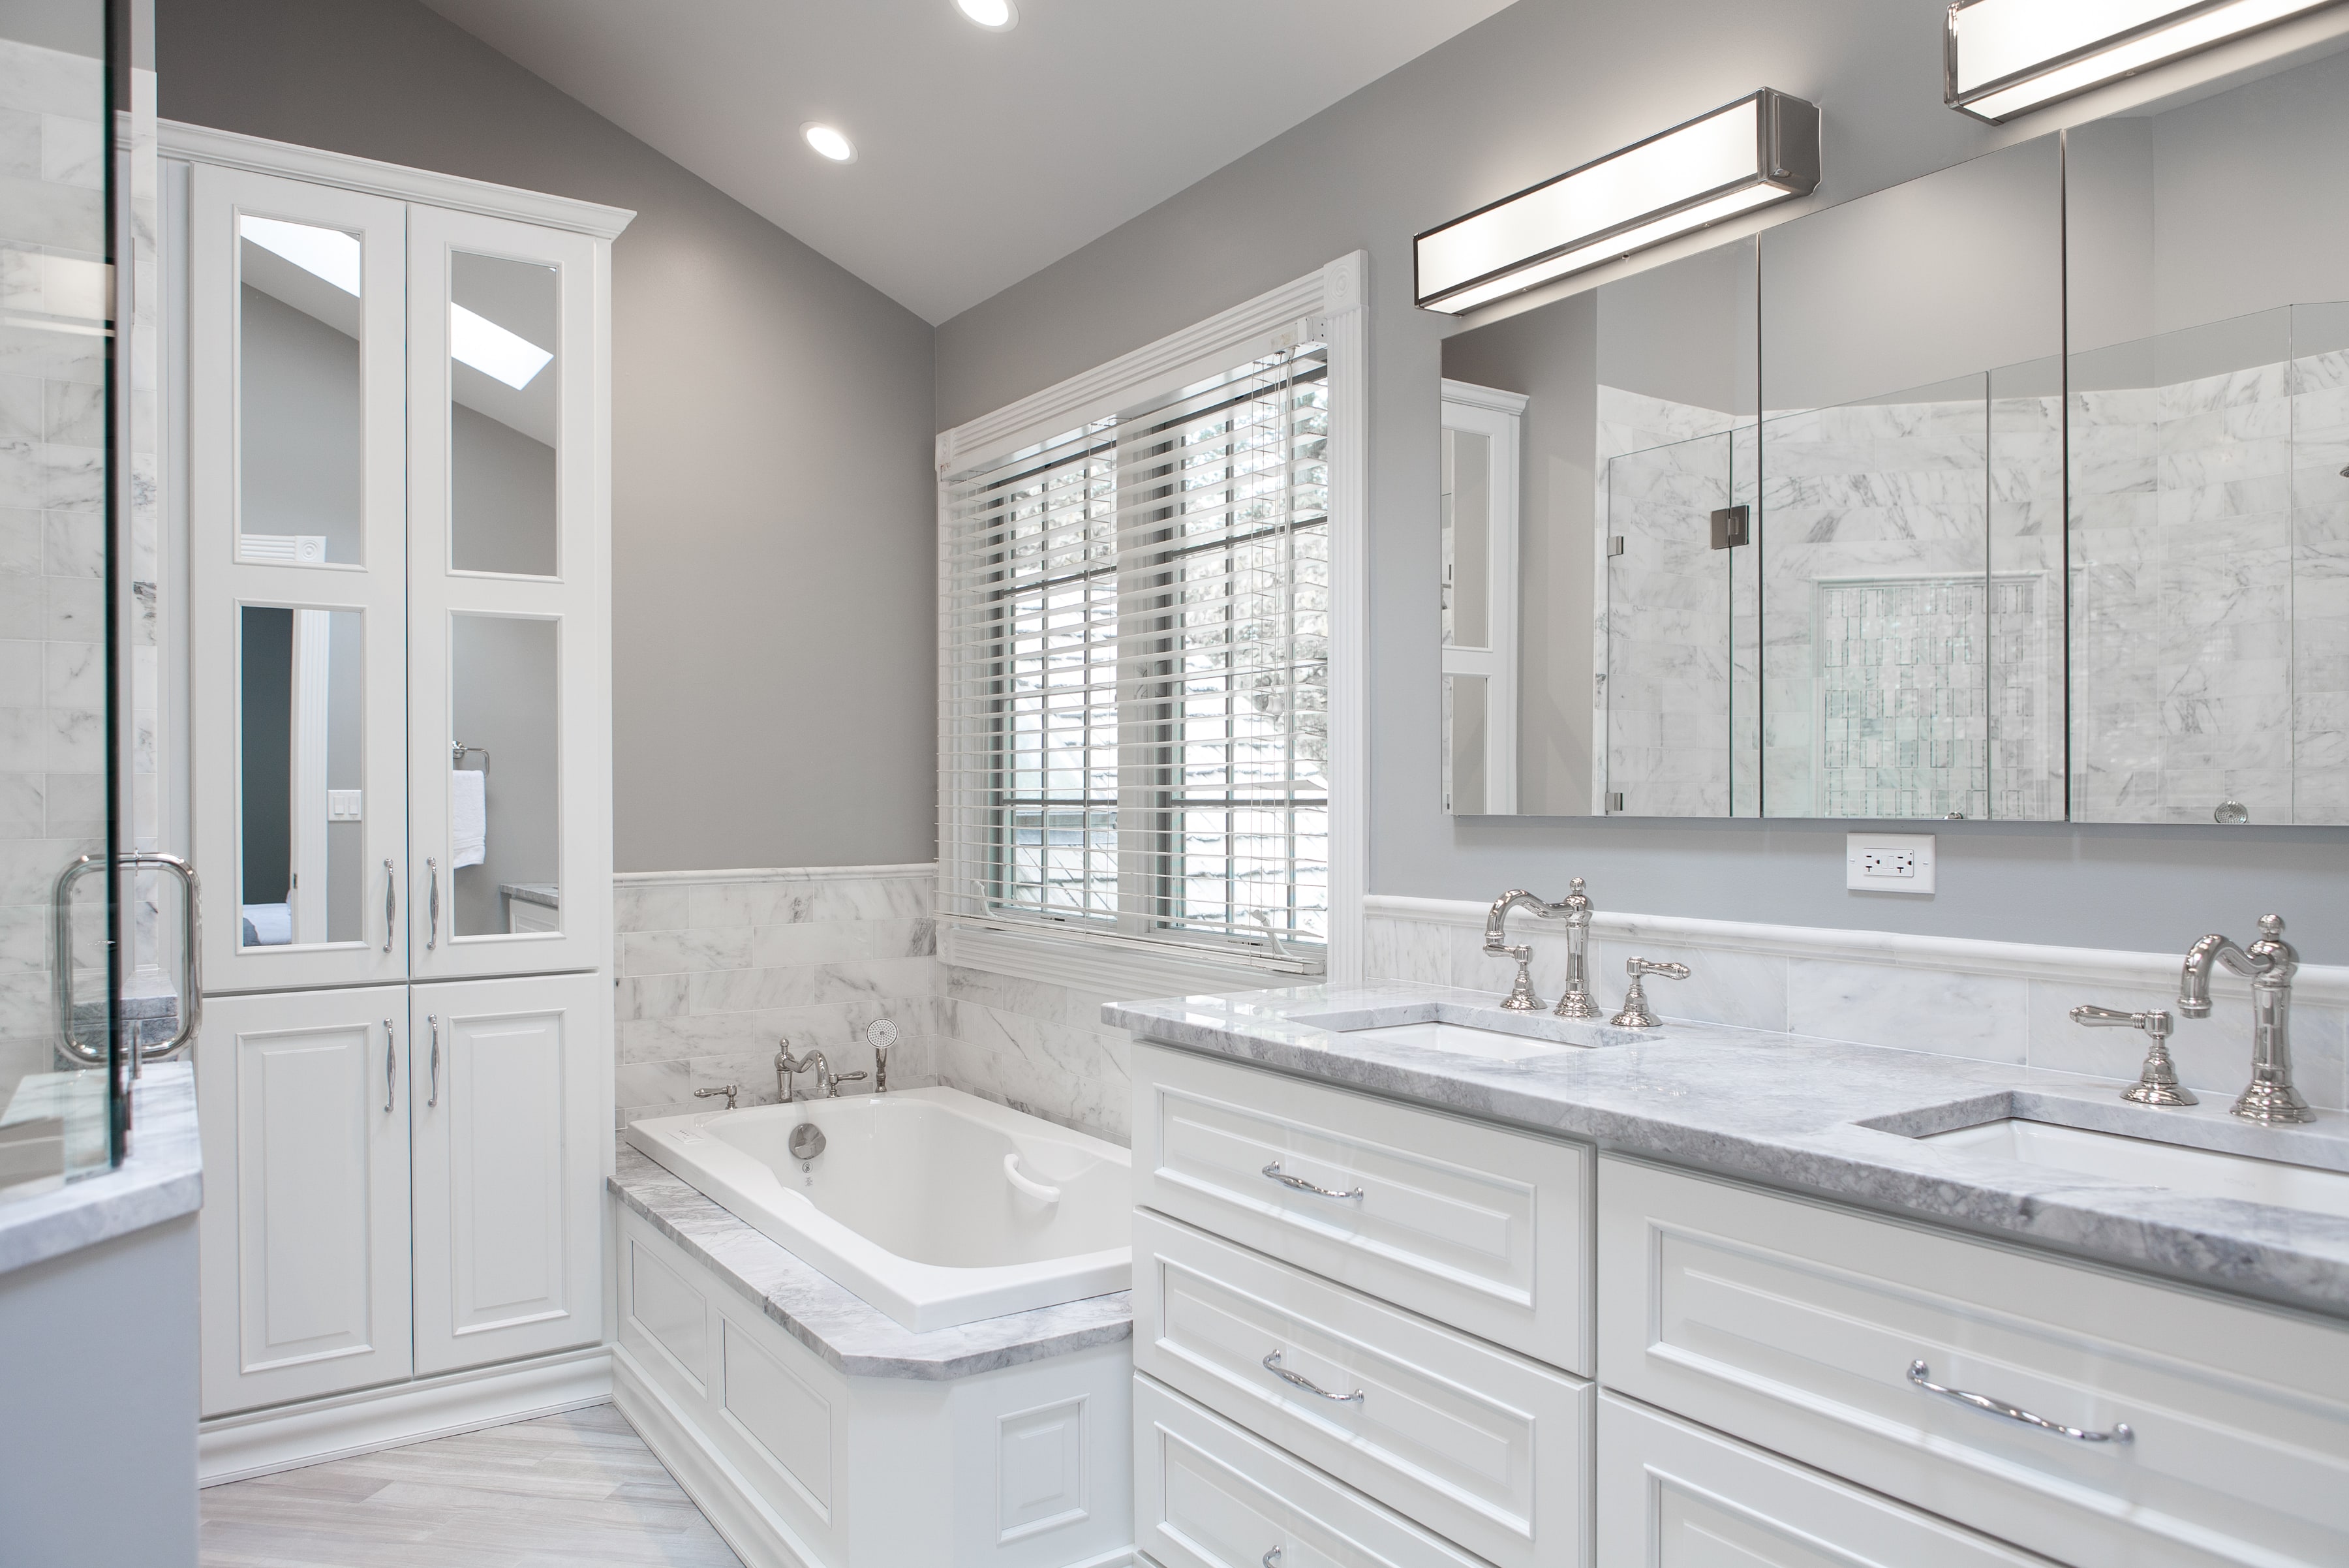 Bathroom Remodeling - Featured Project